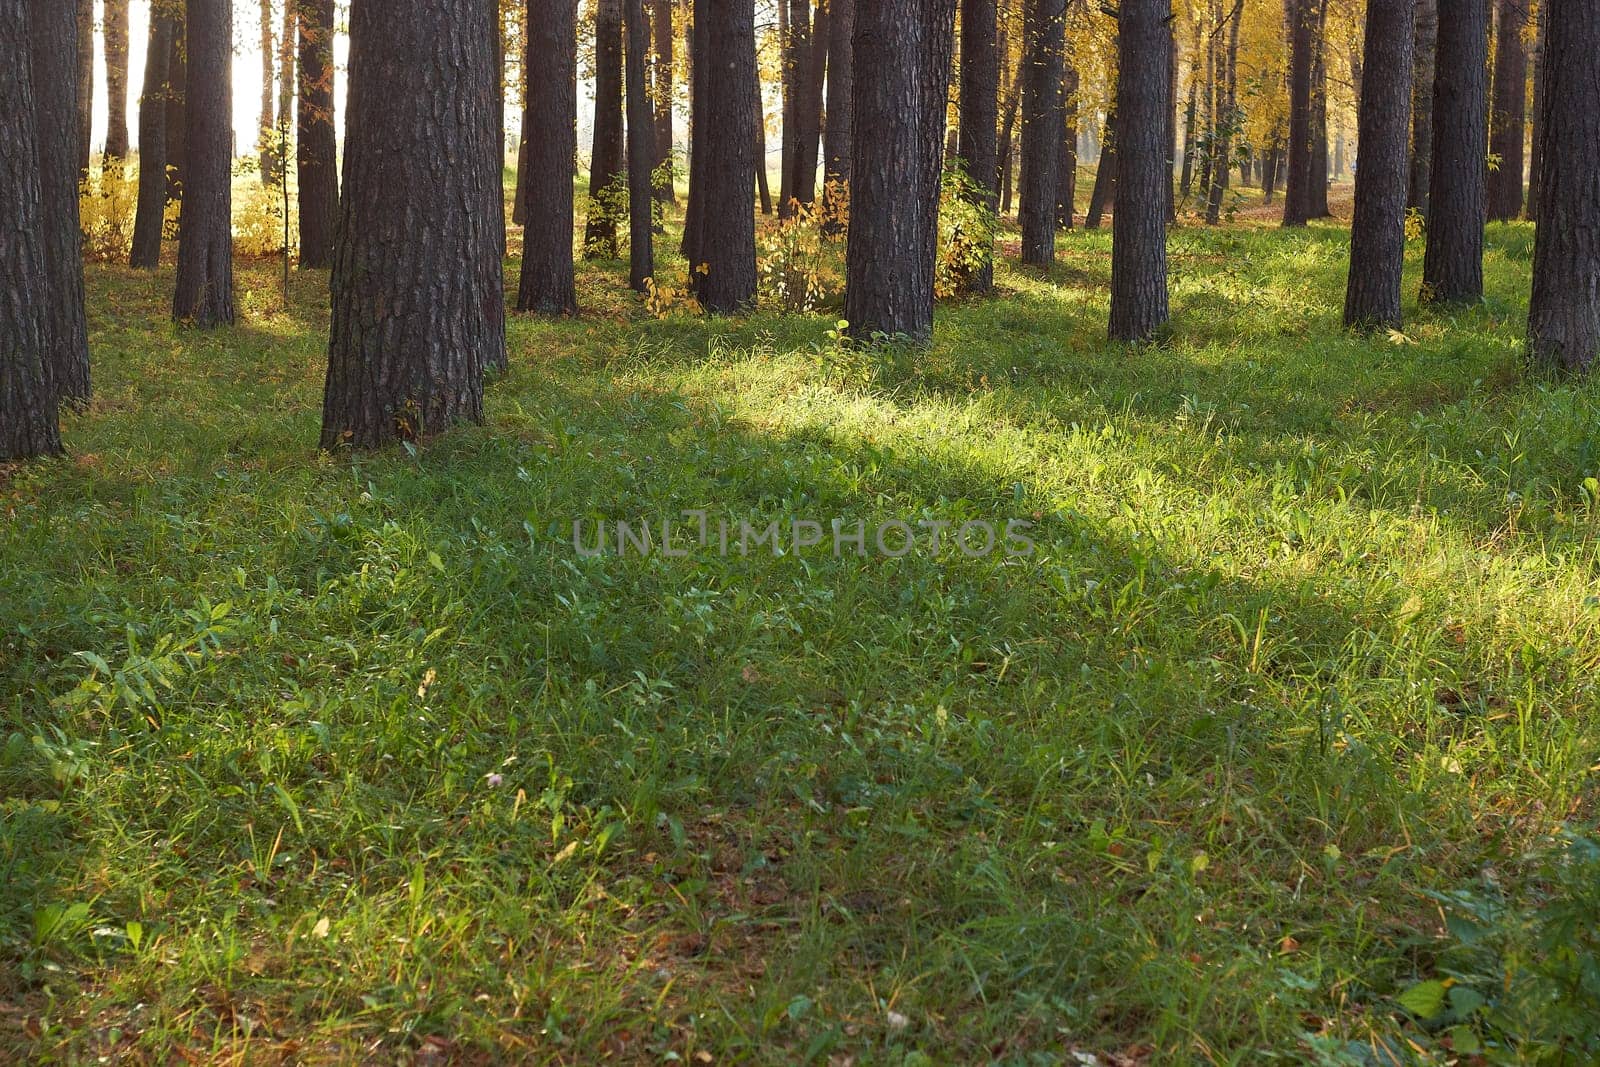 autumn light in the forest on the grass among the pines